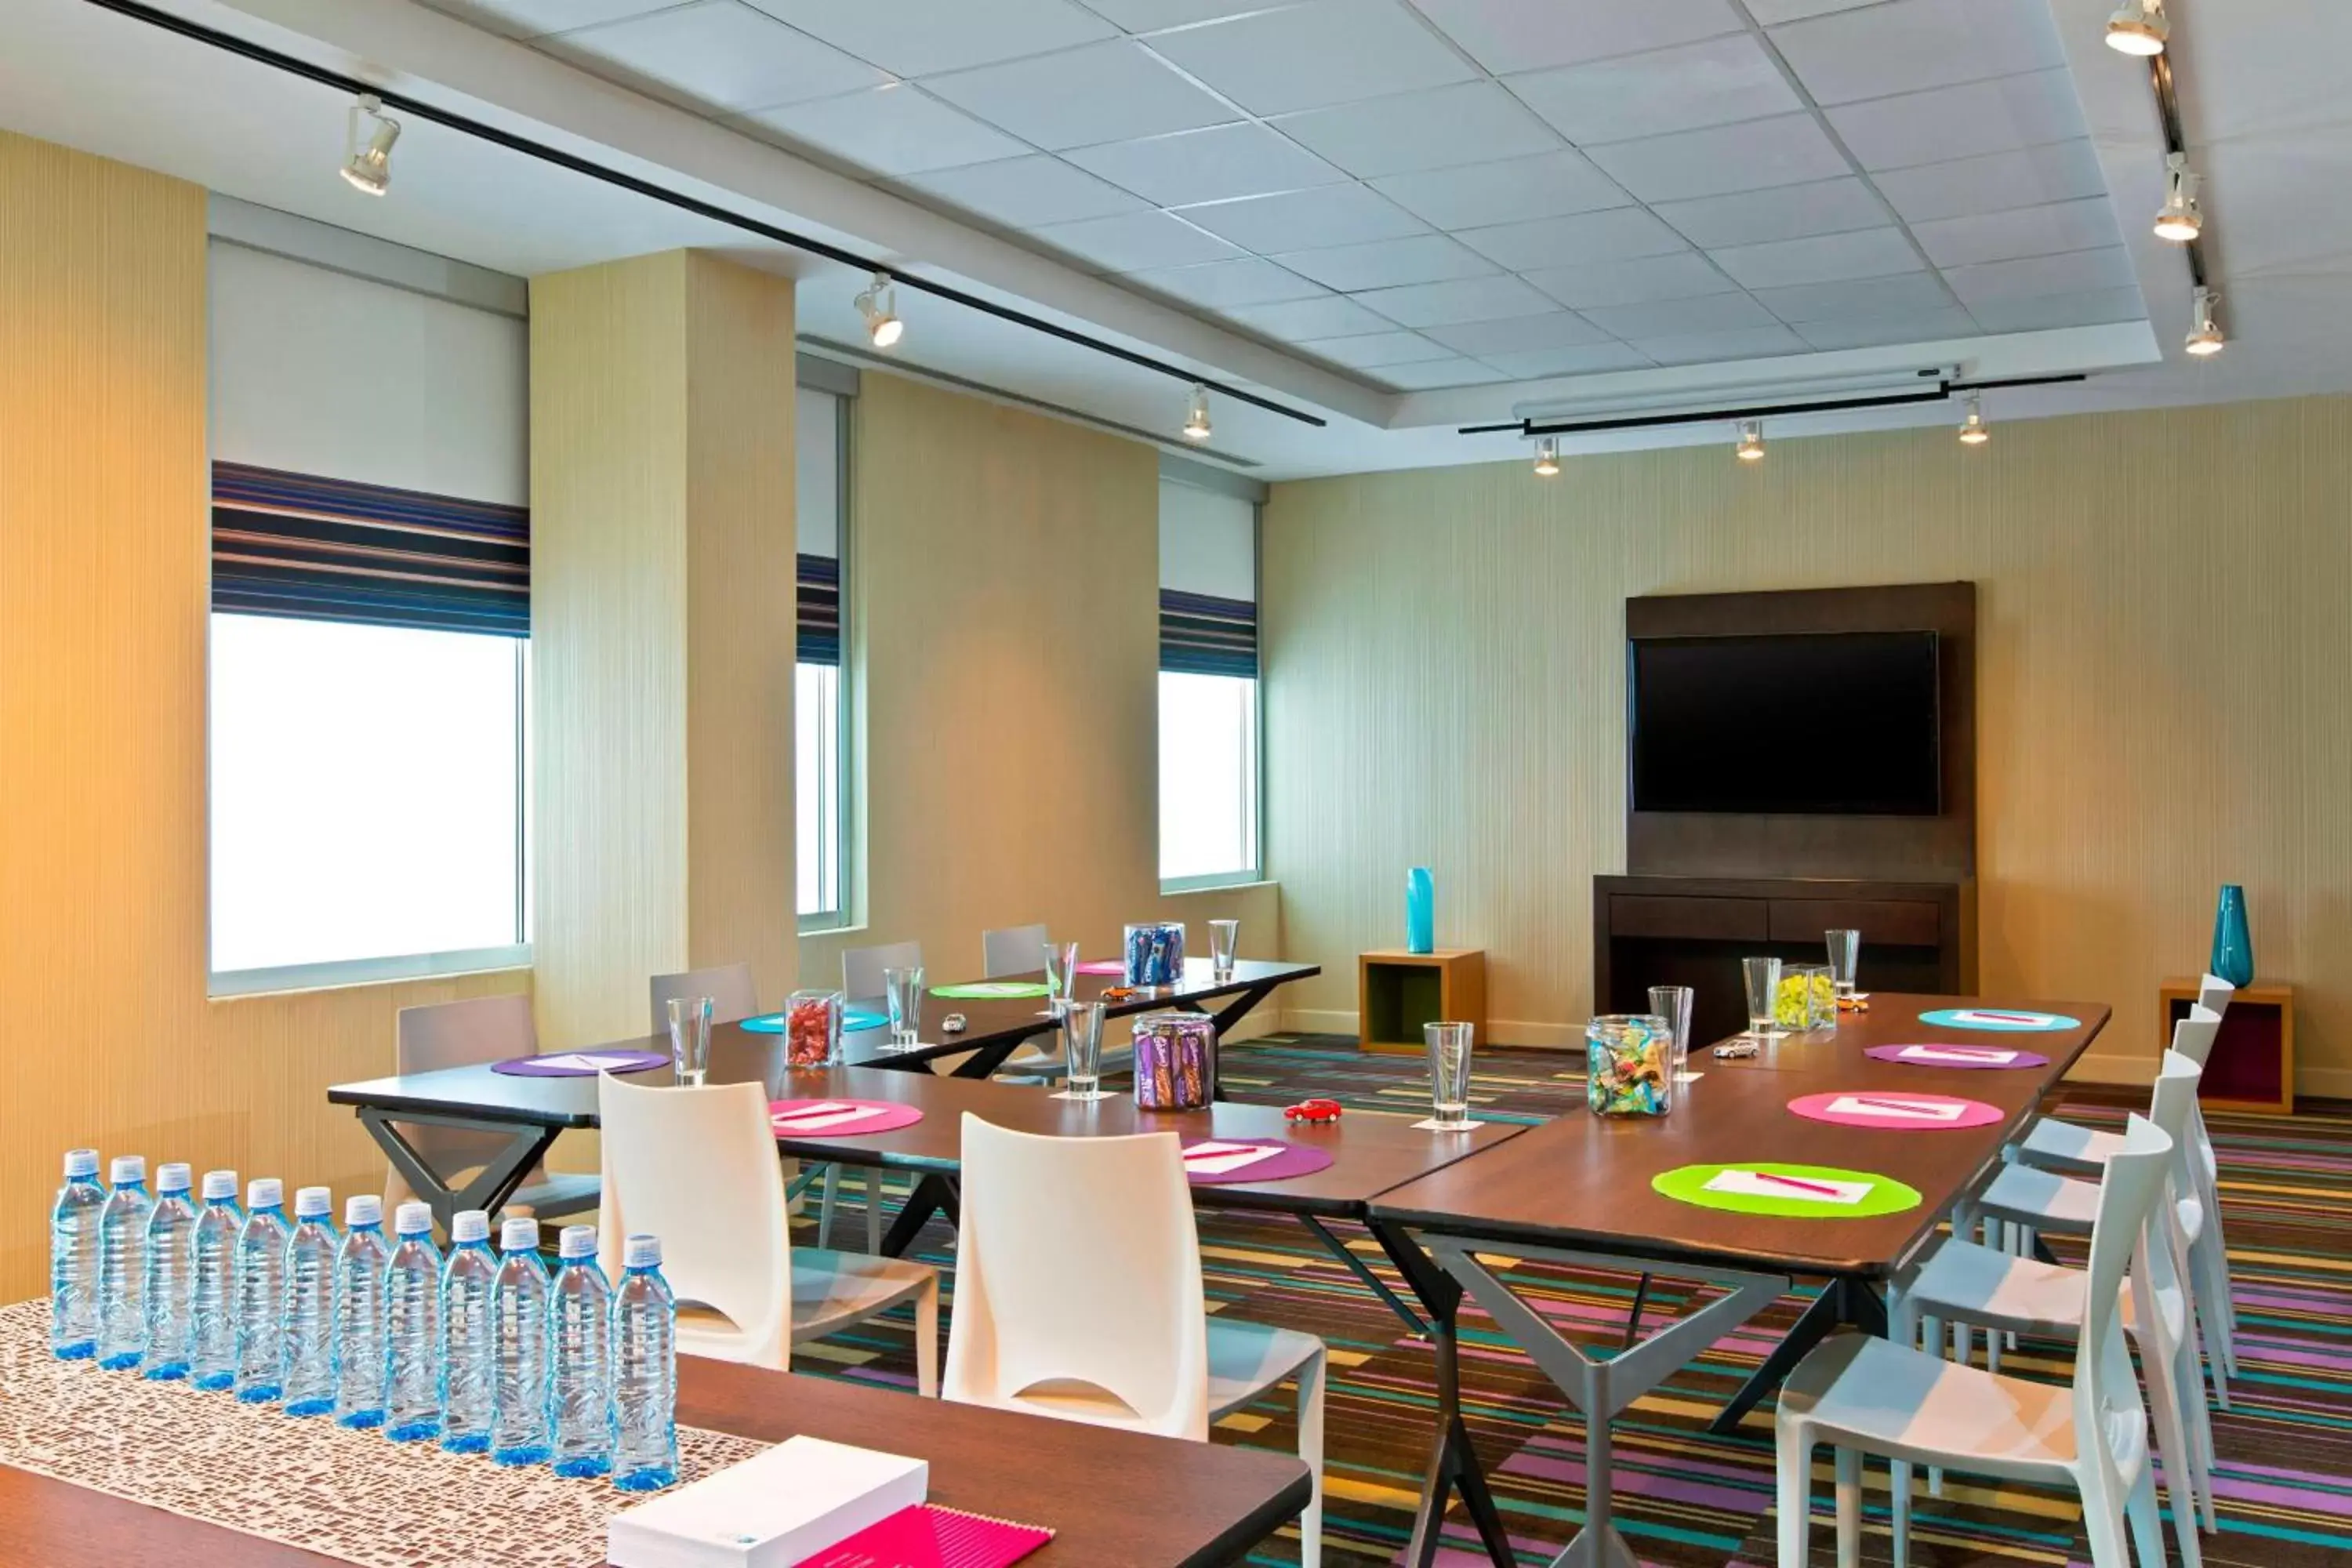 Meeting/conference room in Aloft San Jose Hotel, Costa Rica